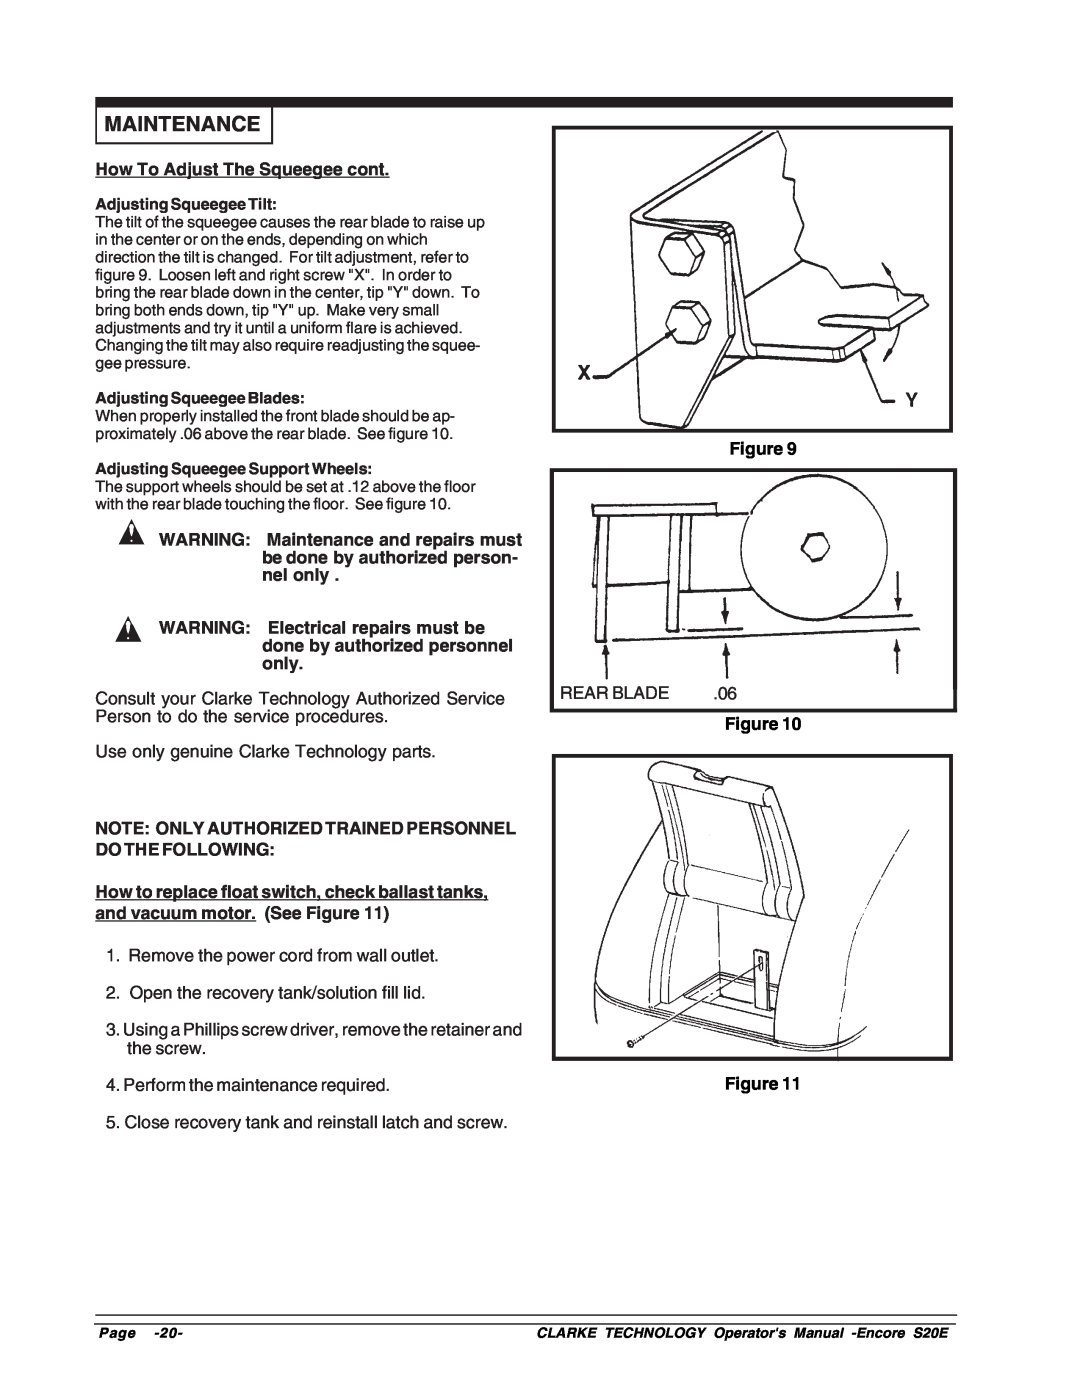 Clarke S20E manual Maintenance, How To Adjust The Squeegee cont, Figure Figure 